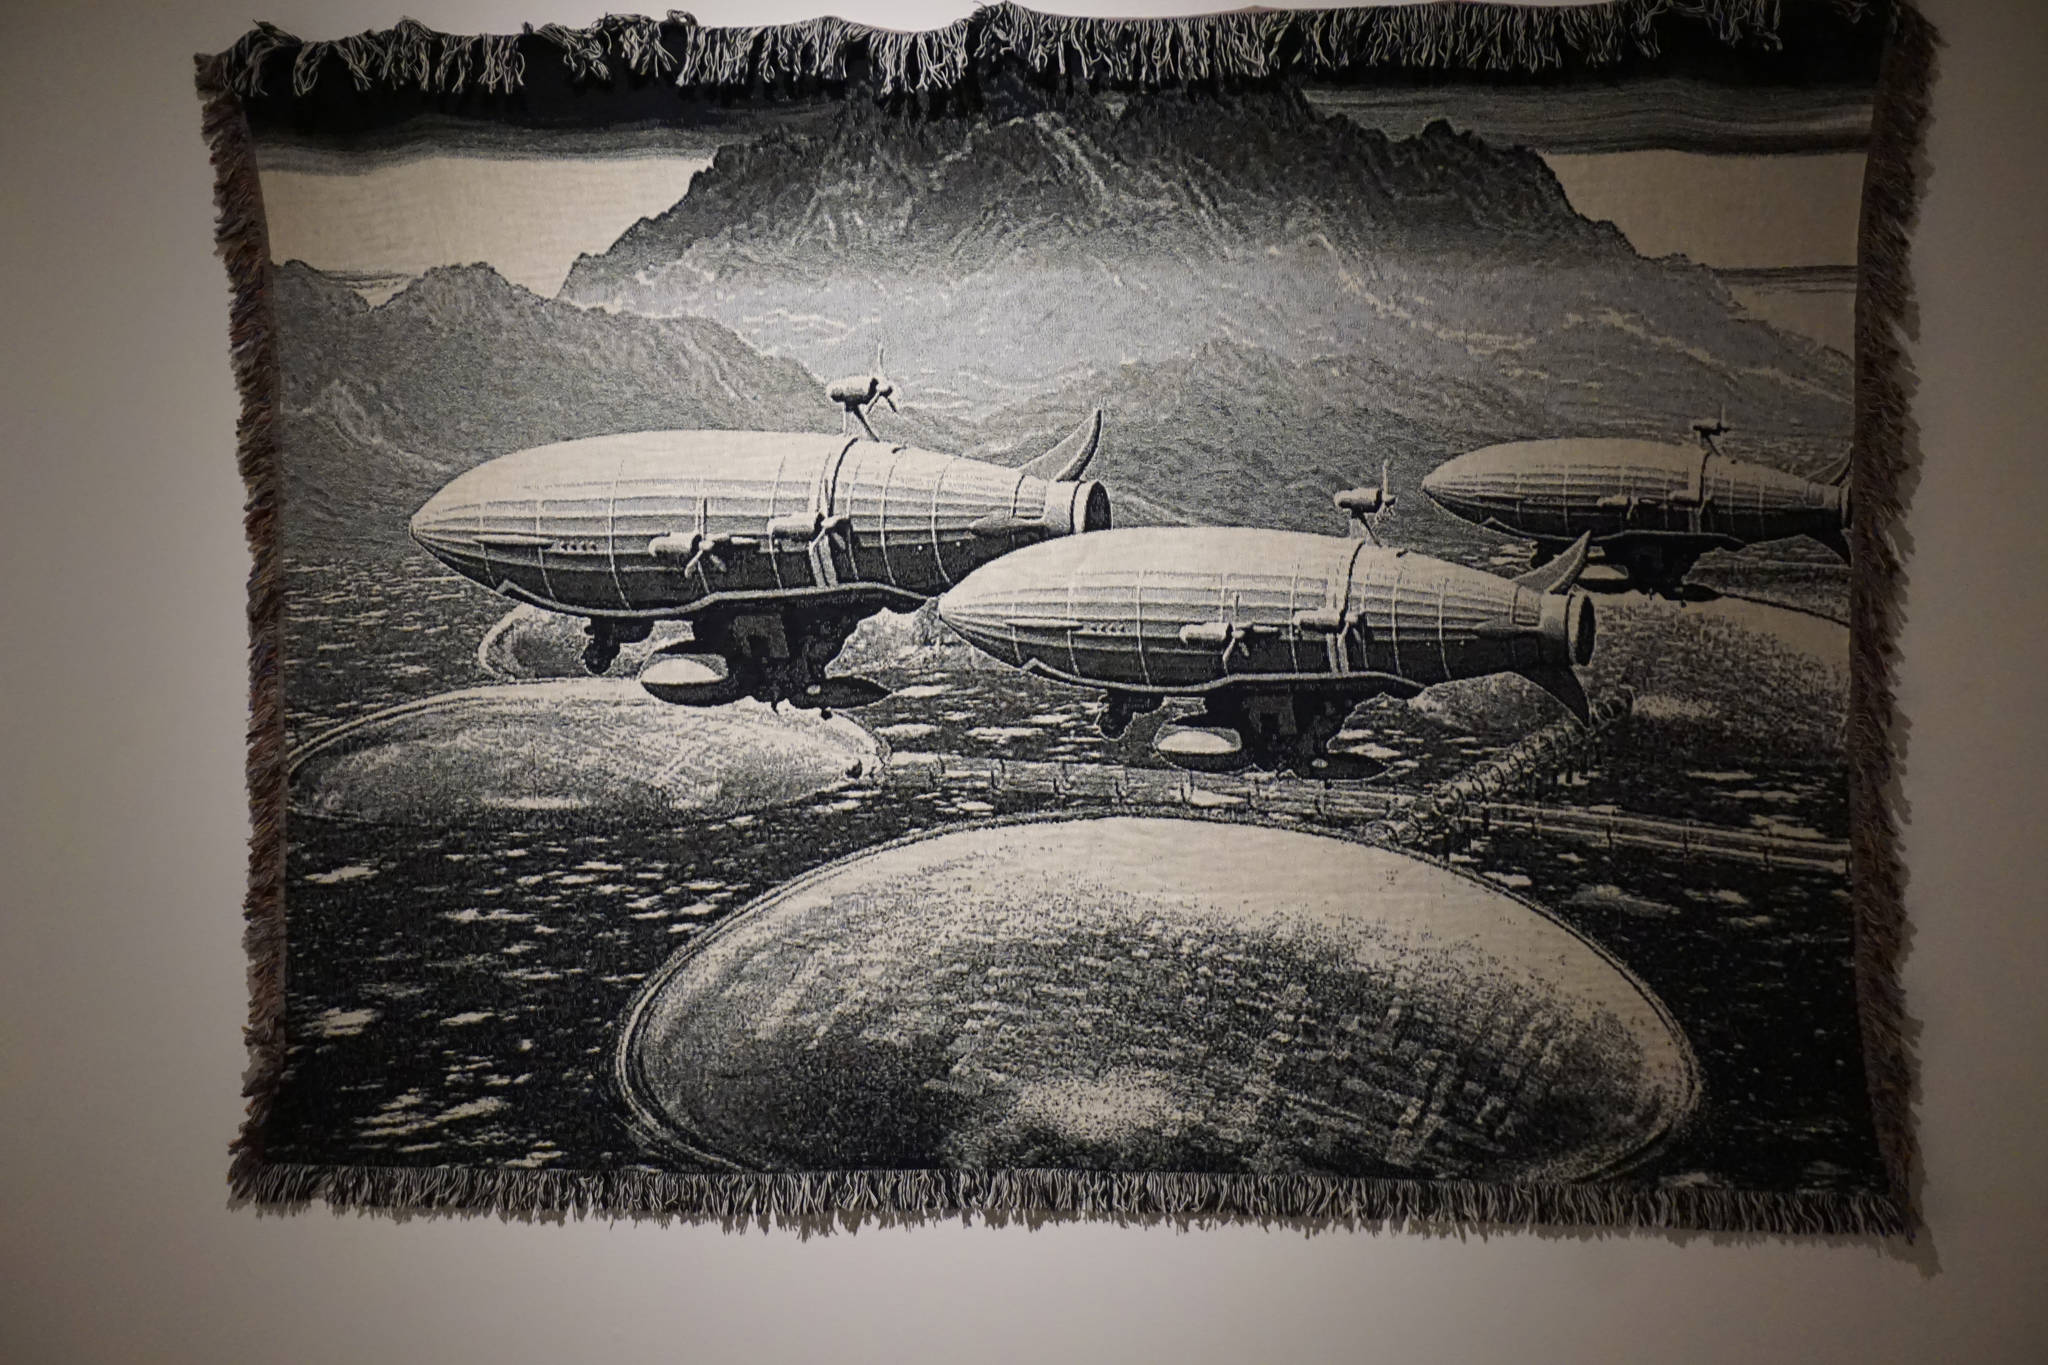 Fabric art from the “Dirigibles of Denali” show at the Pratt Museum can be read by the hp Reveal augmented reality app and cause a layer to appear in a smart phone or tablet. The photo was taken July 6, 2018 at the Pratt Museum, Homer, Alaska. (Photo by Michael Armstrong/Homer News)